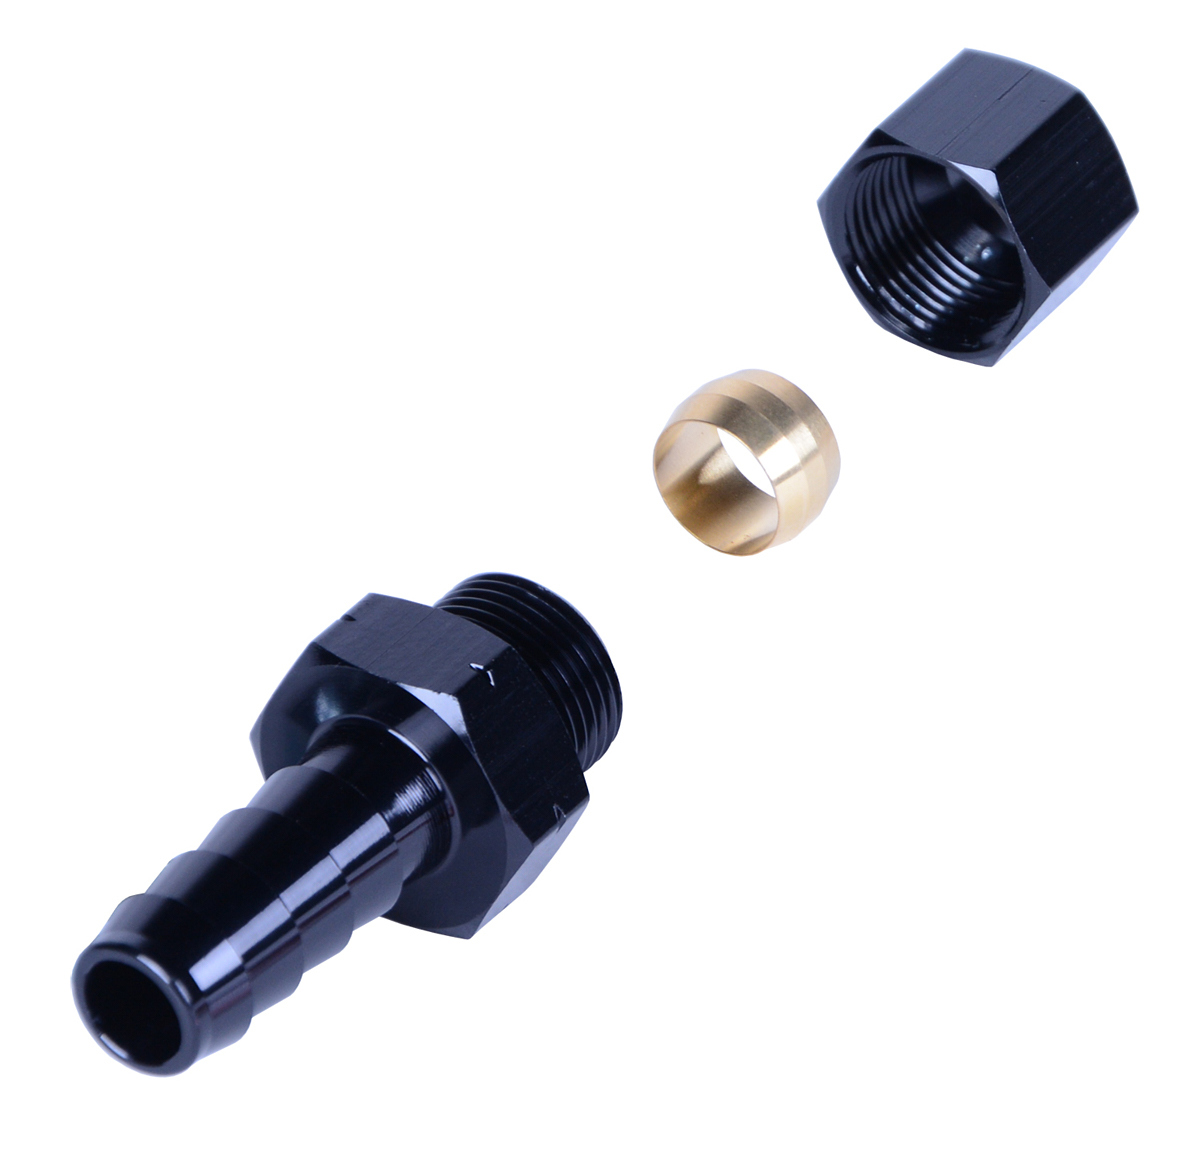 Derale 13042 Fitting, Adapter, Straight, 3/8 in Compression Fitting to 3/8 in Hose Barb, Aluminum, Black Anodized, Each